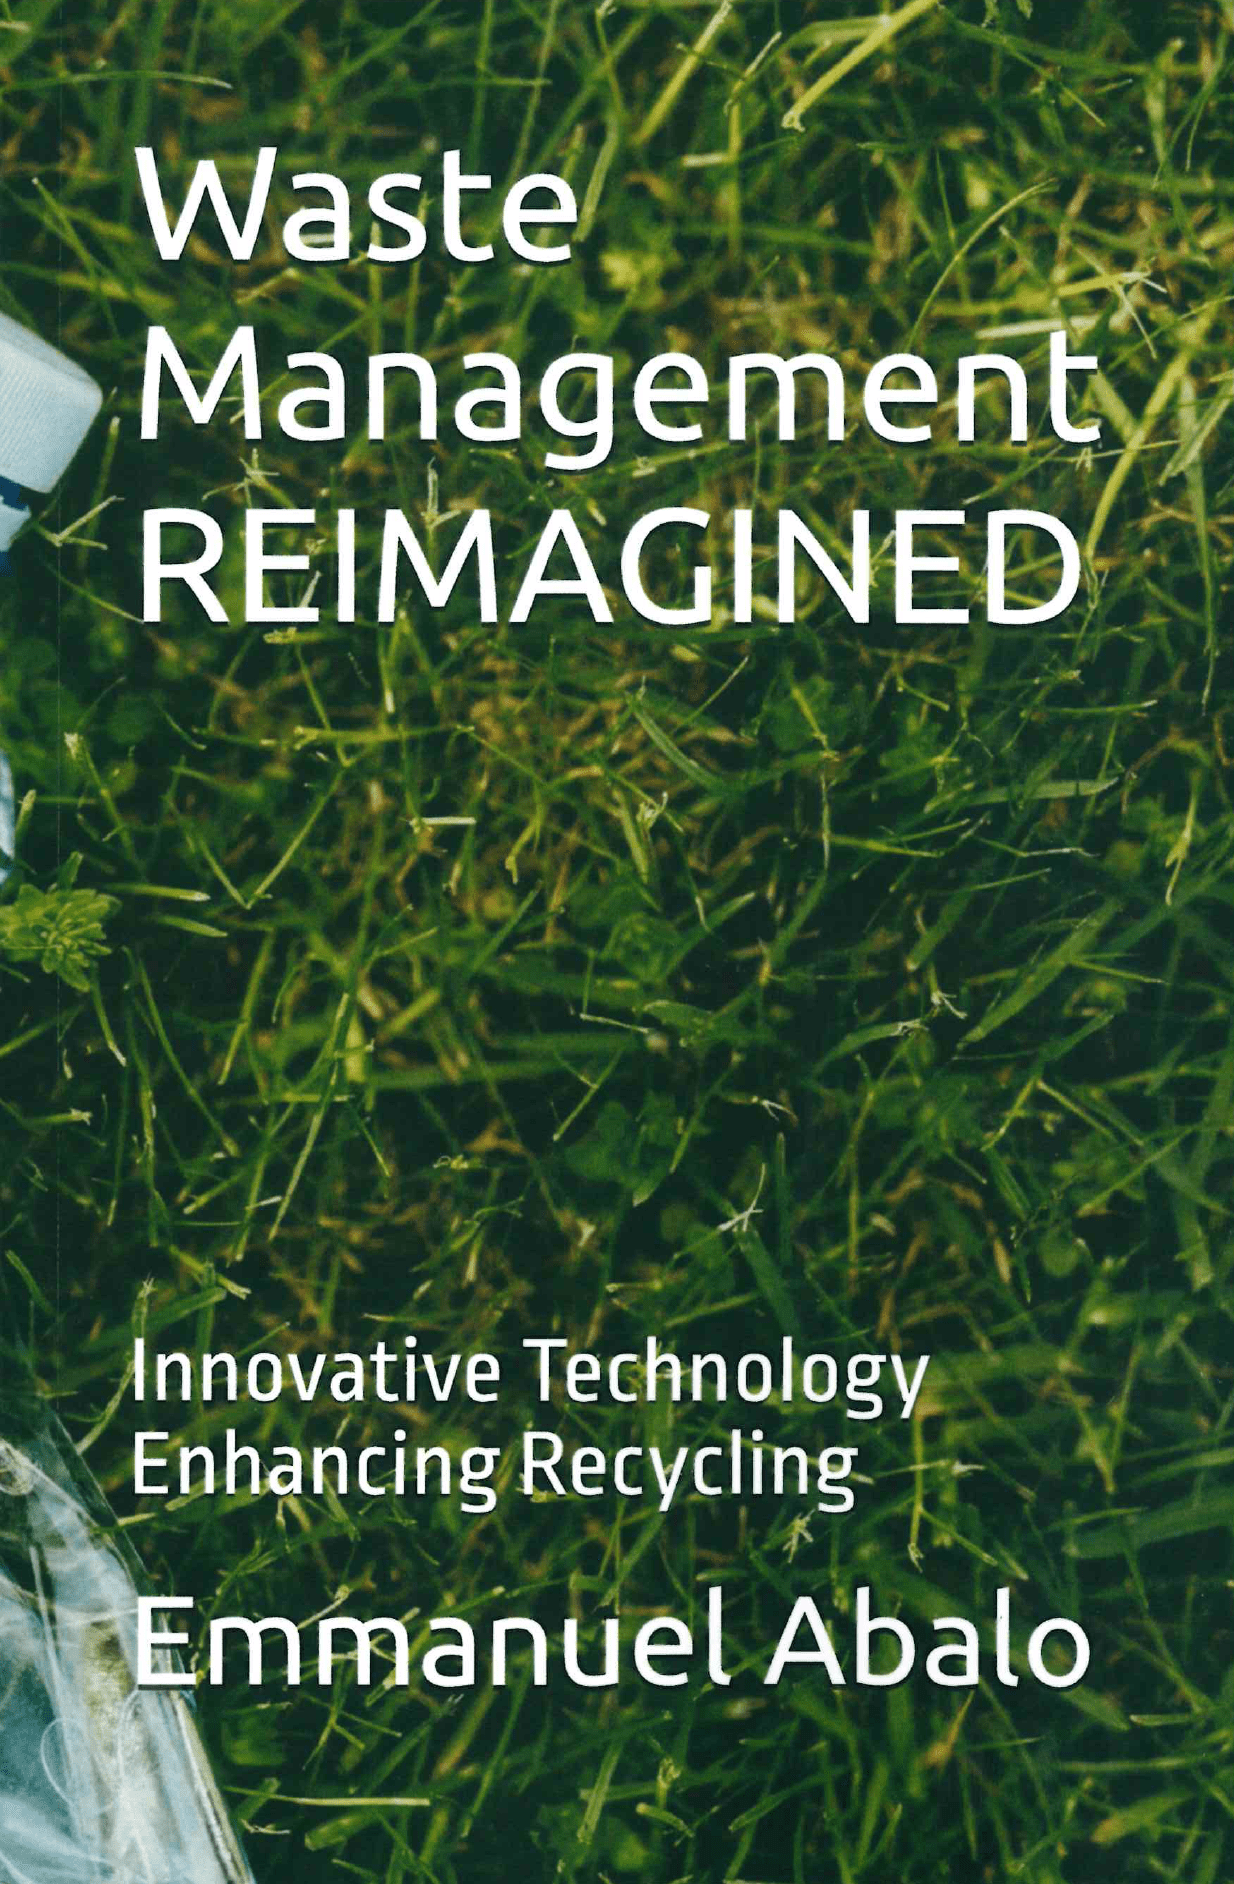 Cover of Dr. Abalo's book, Waste Management Reimagined.